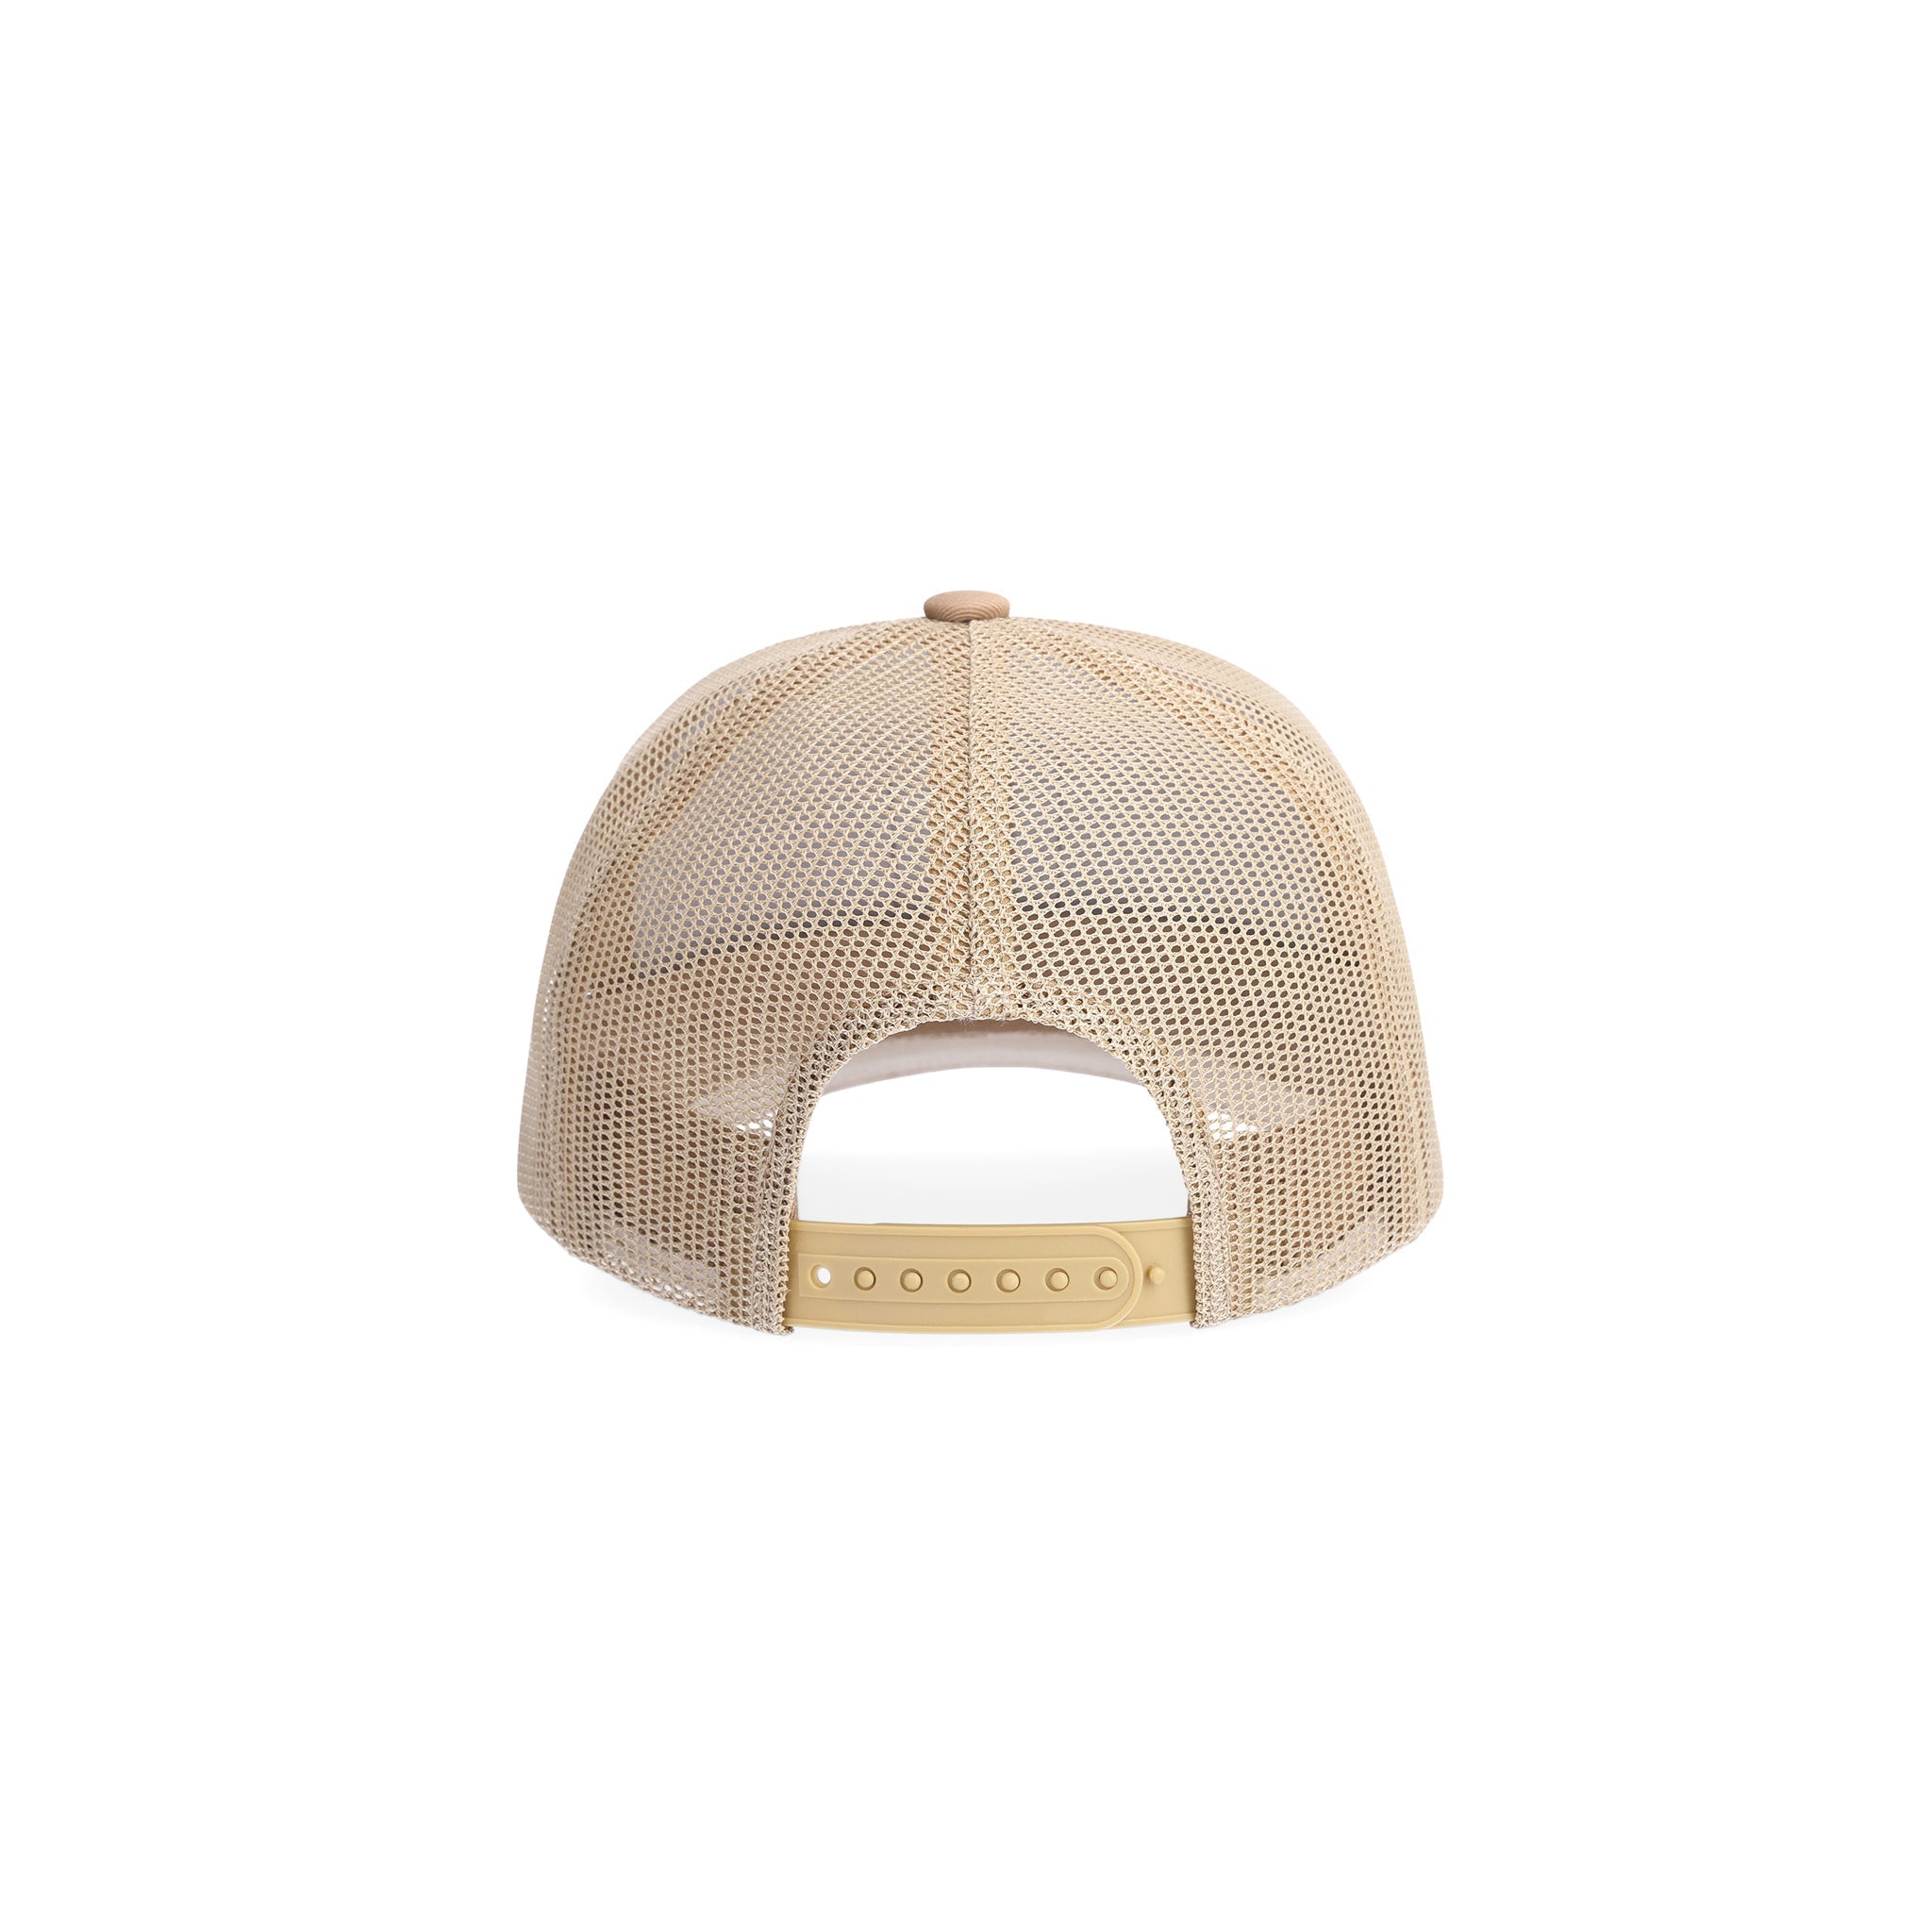 Back shot of Topo Designs Trucker Hat with mesh back and original logo patch in "Tan".